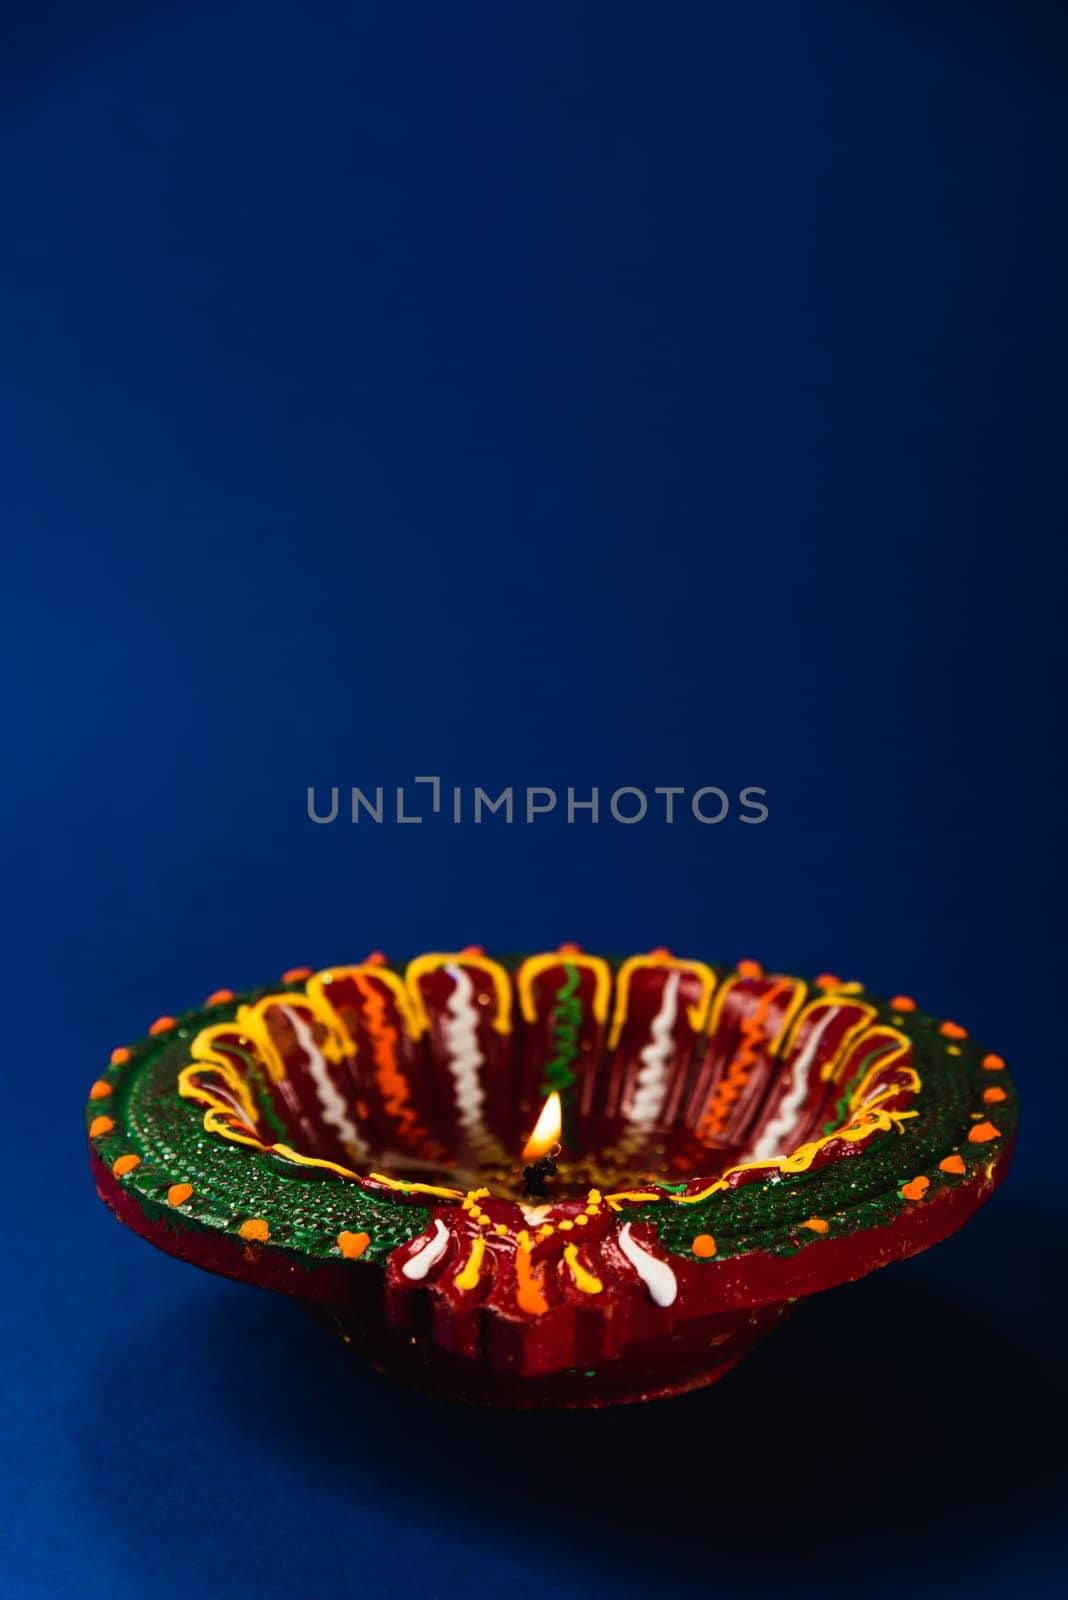 Diwali joy captured in the glow of colorful clay diya lamps, signifying prosperity and happiness, set against a calming blue background. Ideal for greeting cards and religious ceremonies.